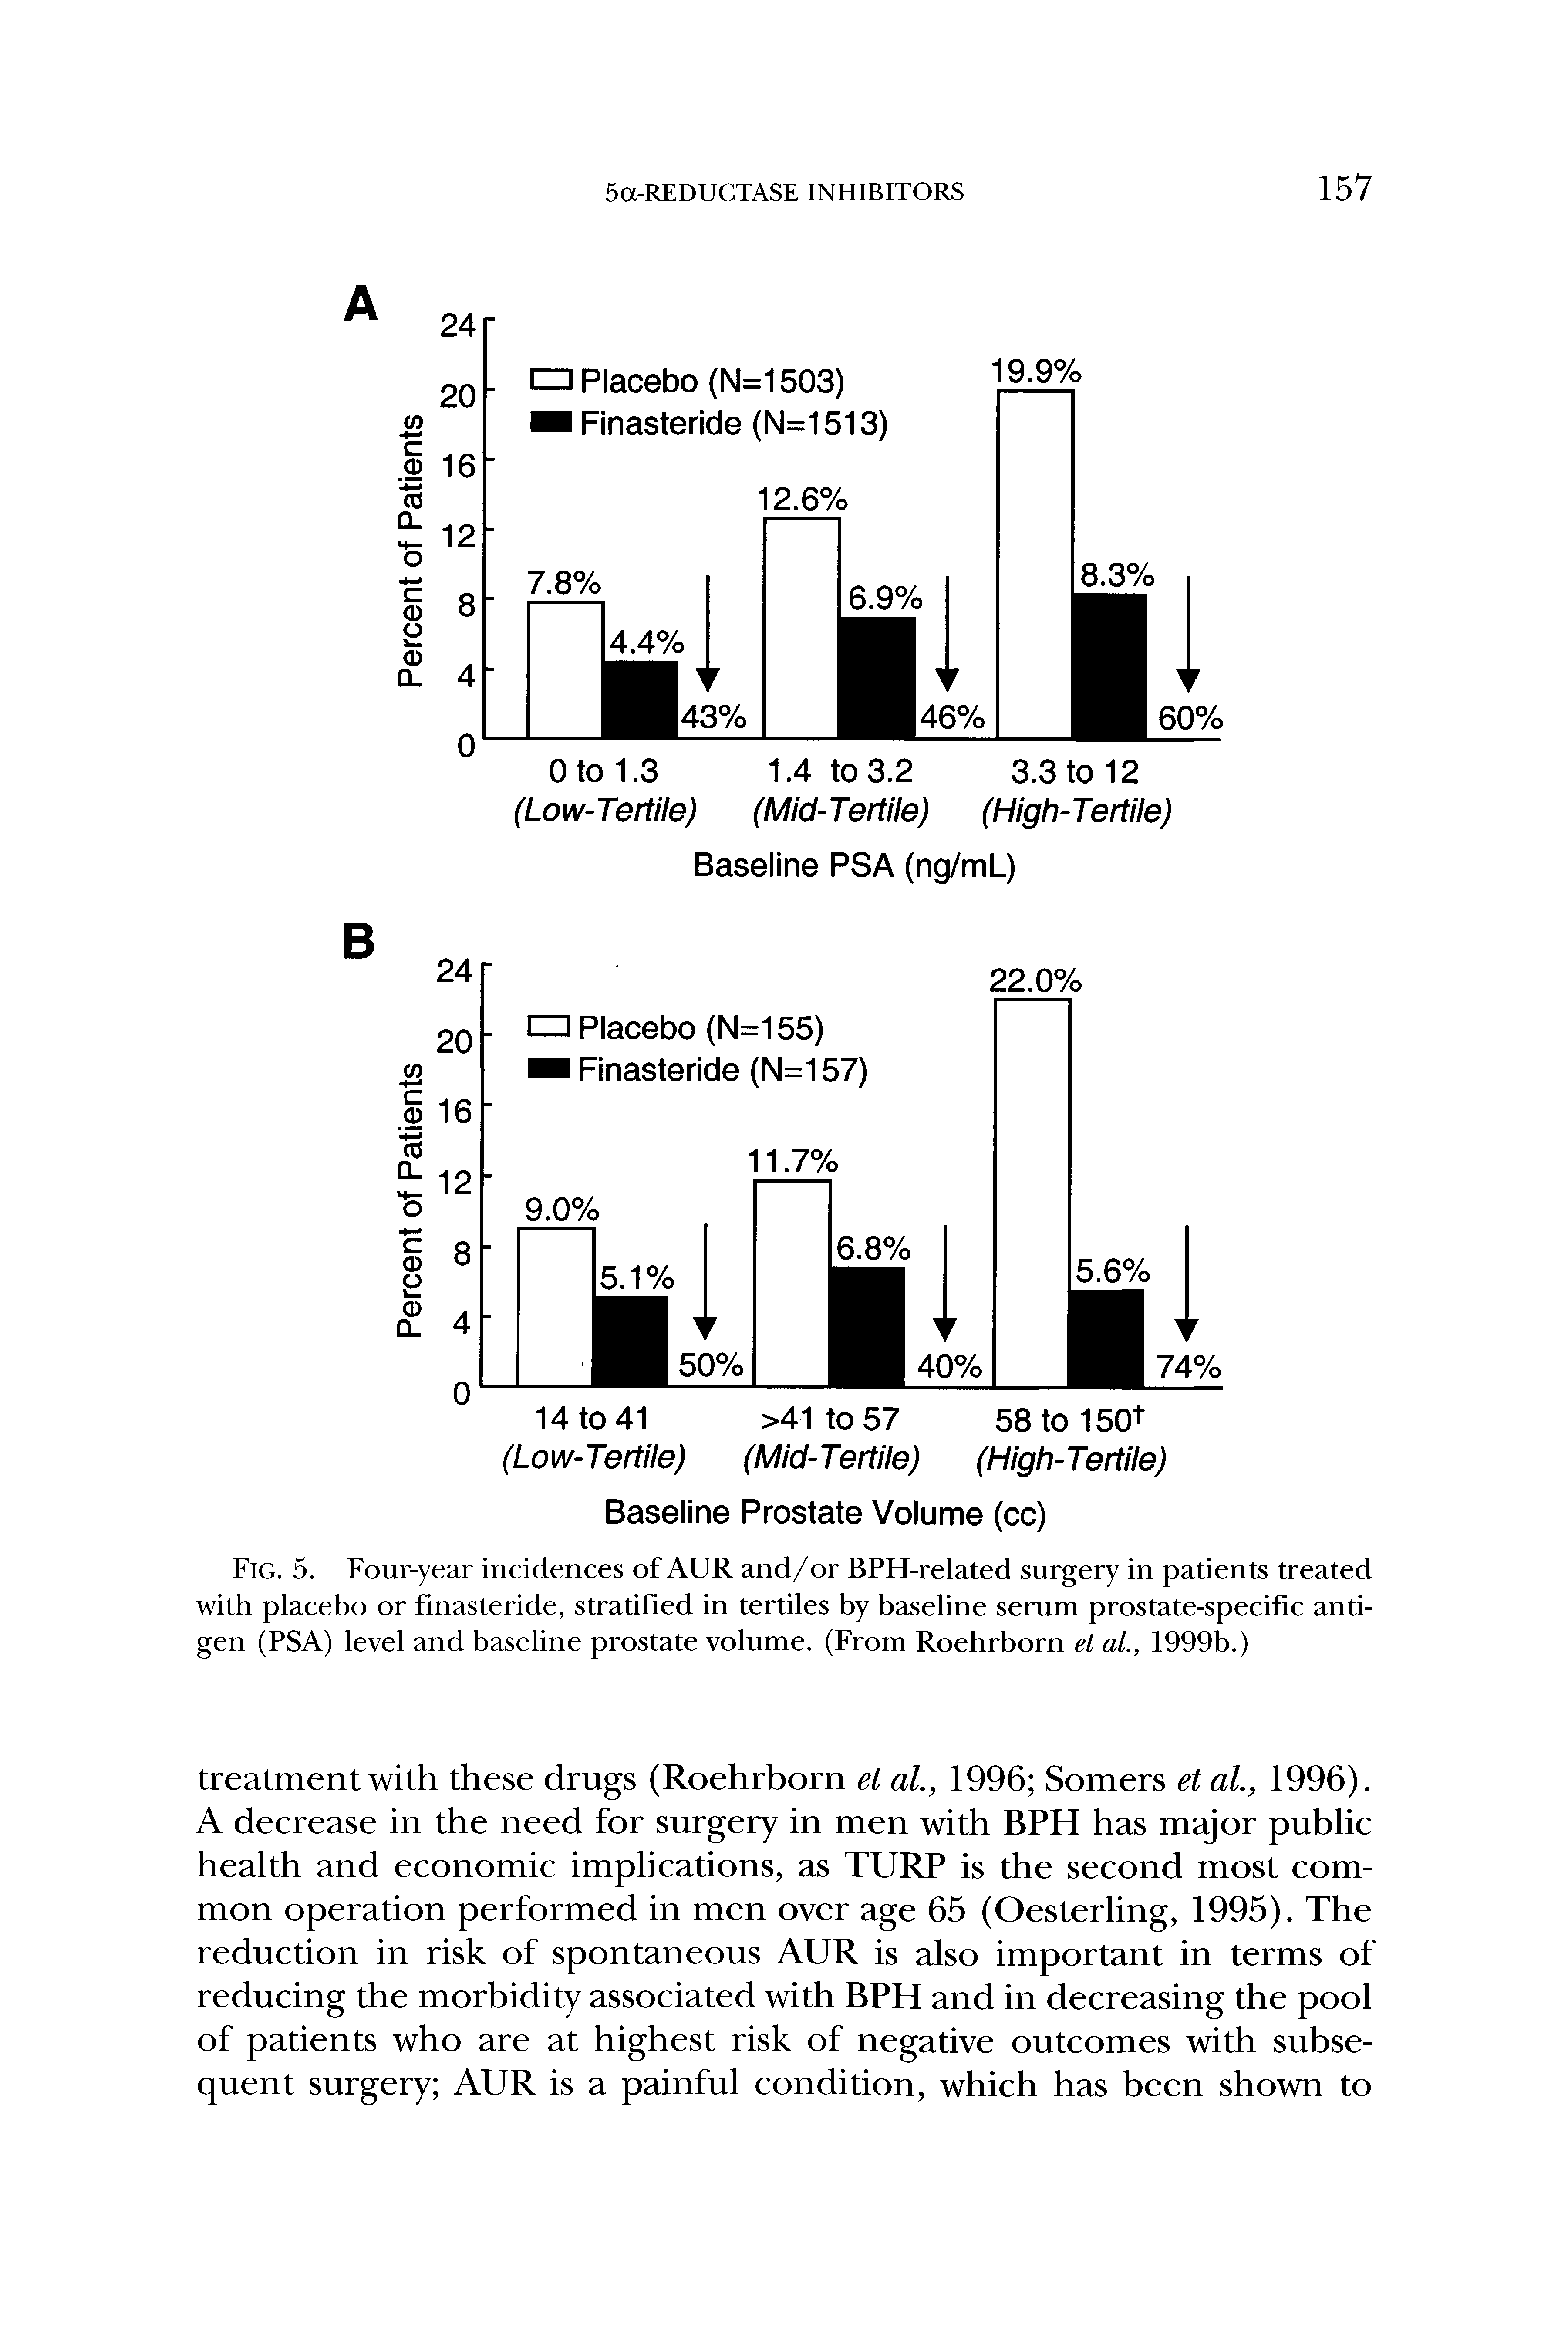 Fig. 5. Four-year incidences of AUR and/or BPH-related surgery in patients treated with placebo or finasteride, stratified in tertiles by baseline serum prostate-specific antigen (PSA) level and baseline prostate volume. (From Roehrborn et al., 1999b.)...